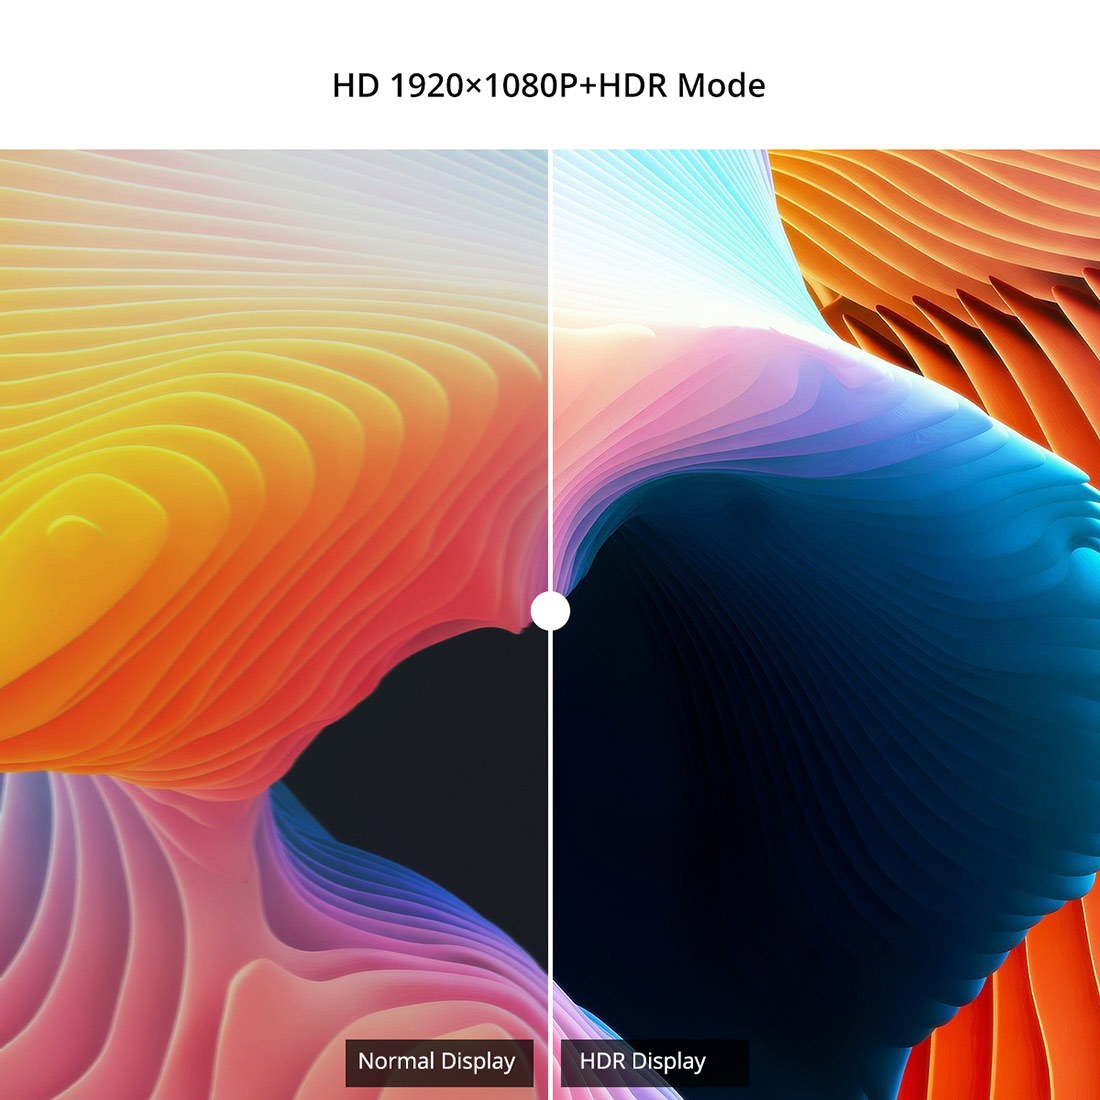 15.6 inch FHD Screen with HDR mode